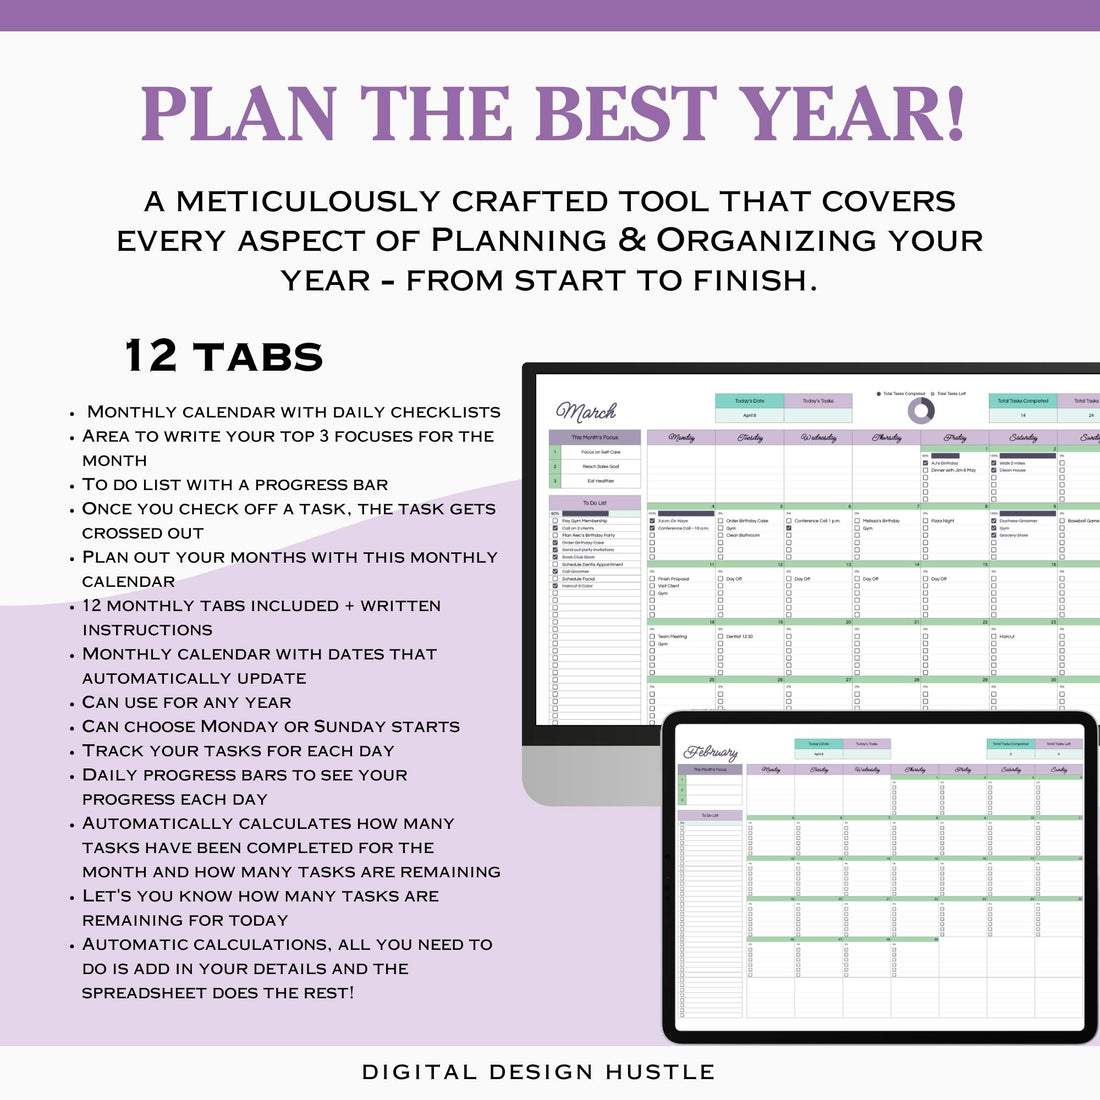 Stay organized and stylish with our Boho Chic Google Sheets Monthly Calendar! This editable spreadsheet is your ultimate tool for tracking tasks, projects, and creating to-do lists for each month. With trendy Boho colors and 12 tabs—one for each month—keeping track of your schedule has never been more visually appealing.